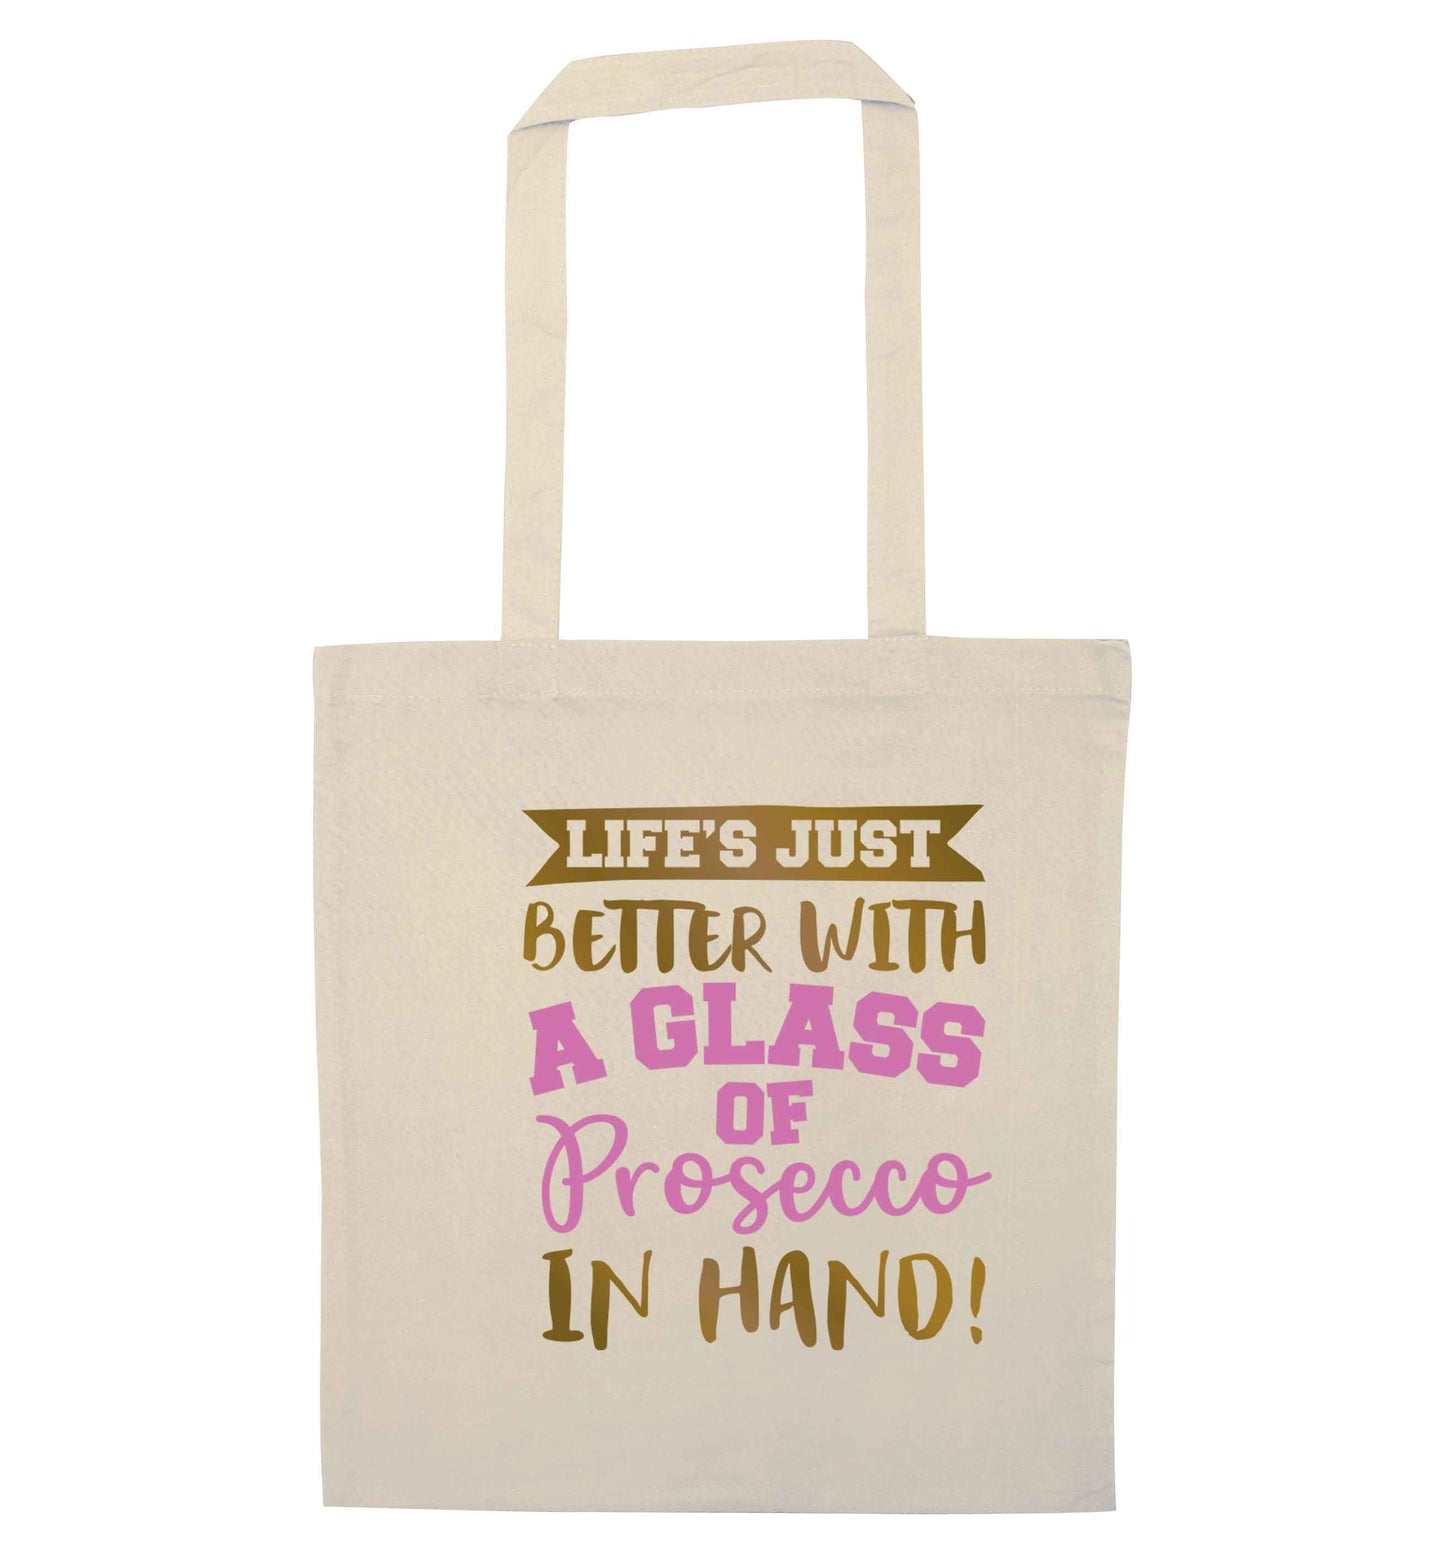 Life's just better with a glass of prosecco in hand natural tote bag